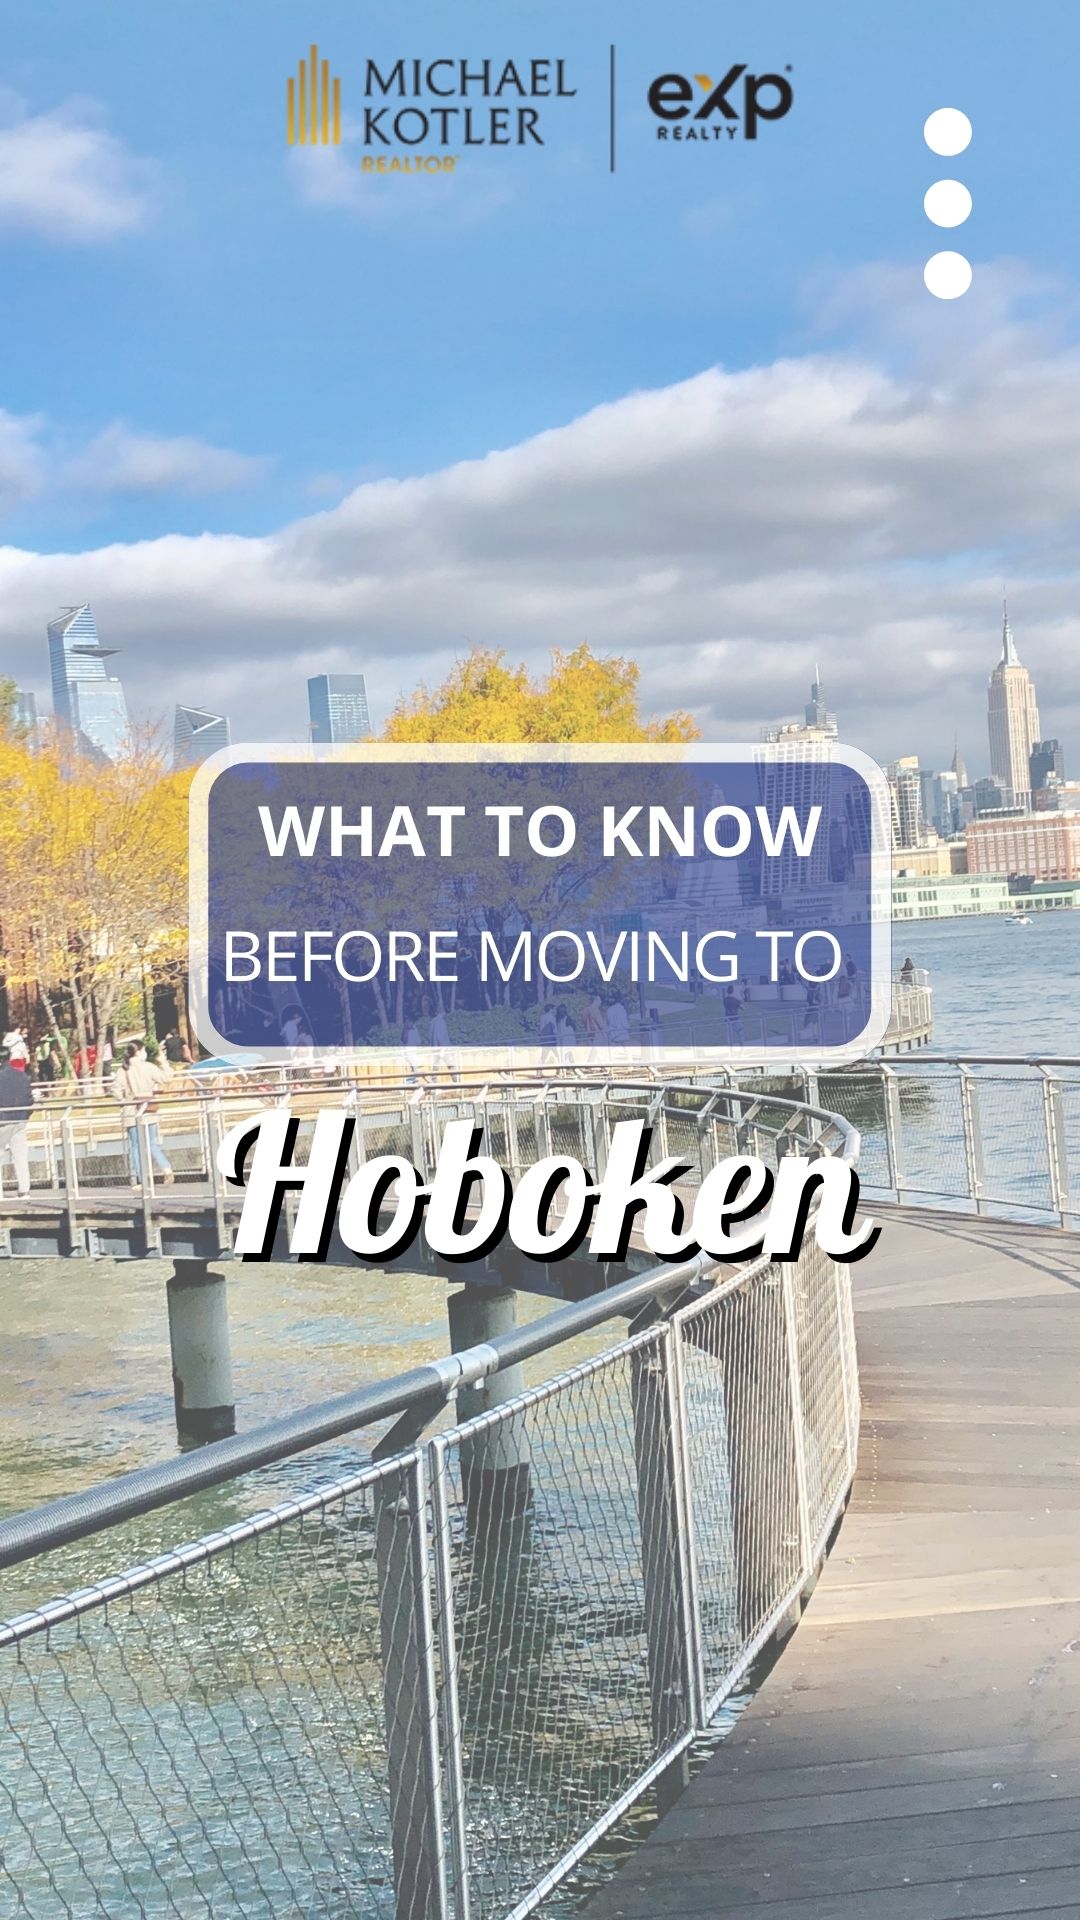 What to know before moving to Hoboken